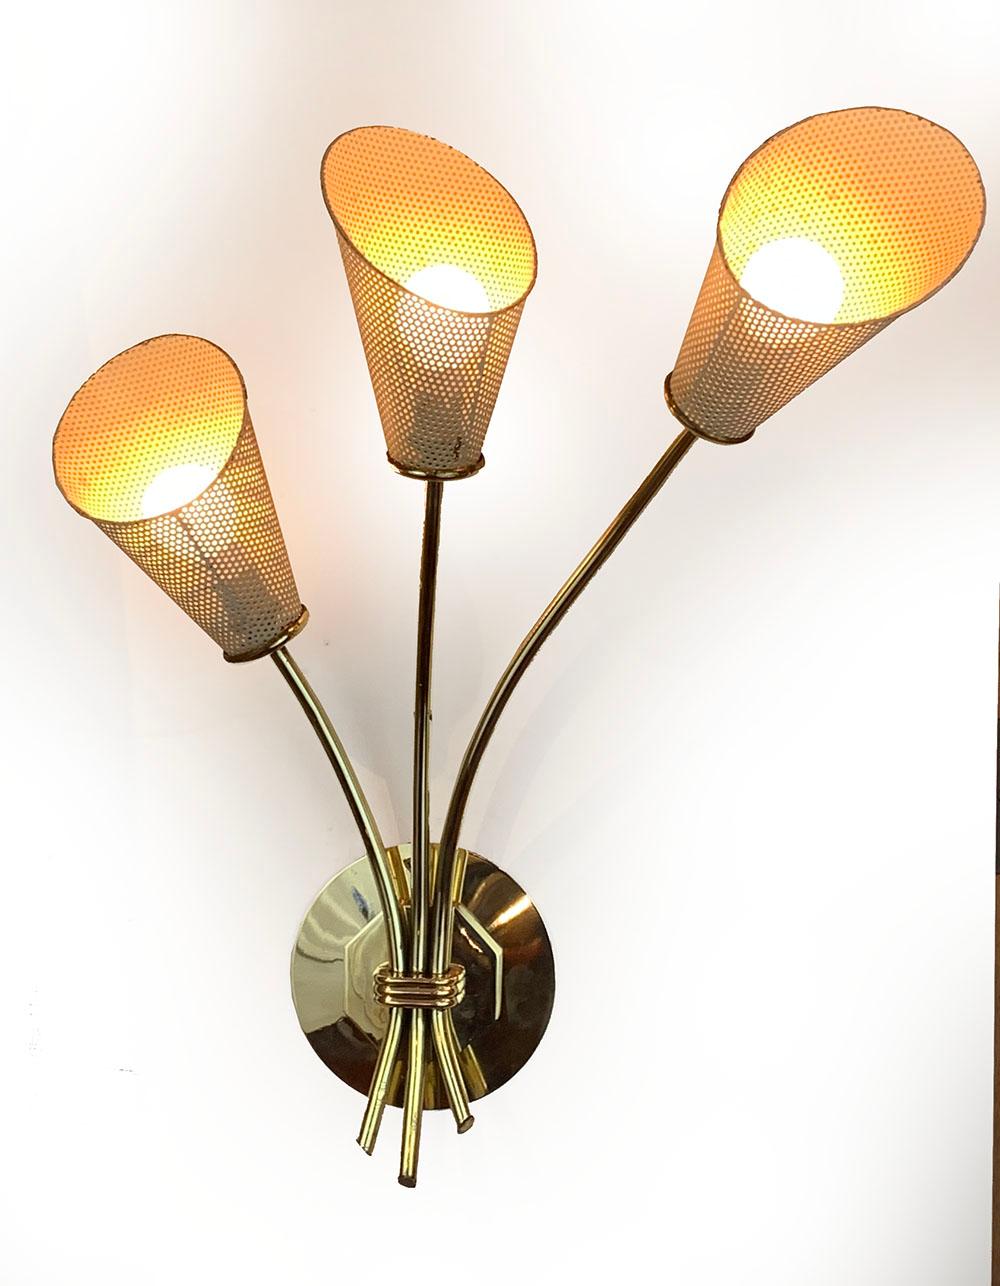 Pair of superb French Mid-Century Modern three light sconces, in brass and white lacquered perforated sheet metal or rigitule lampshades (in original condition), Attributed to Mathieu Mate´got, France c. 1960
Delivered and wired for American or